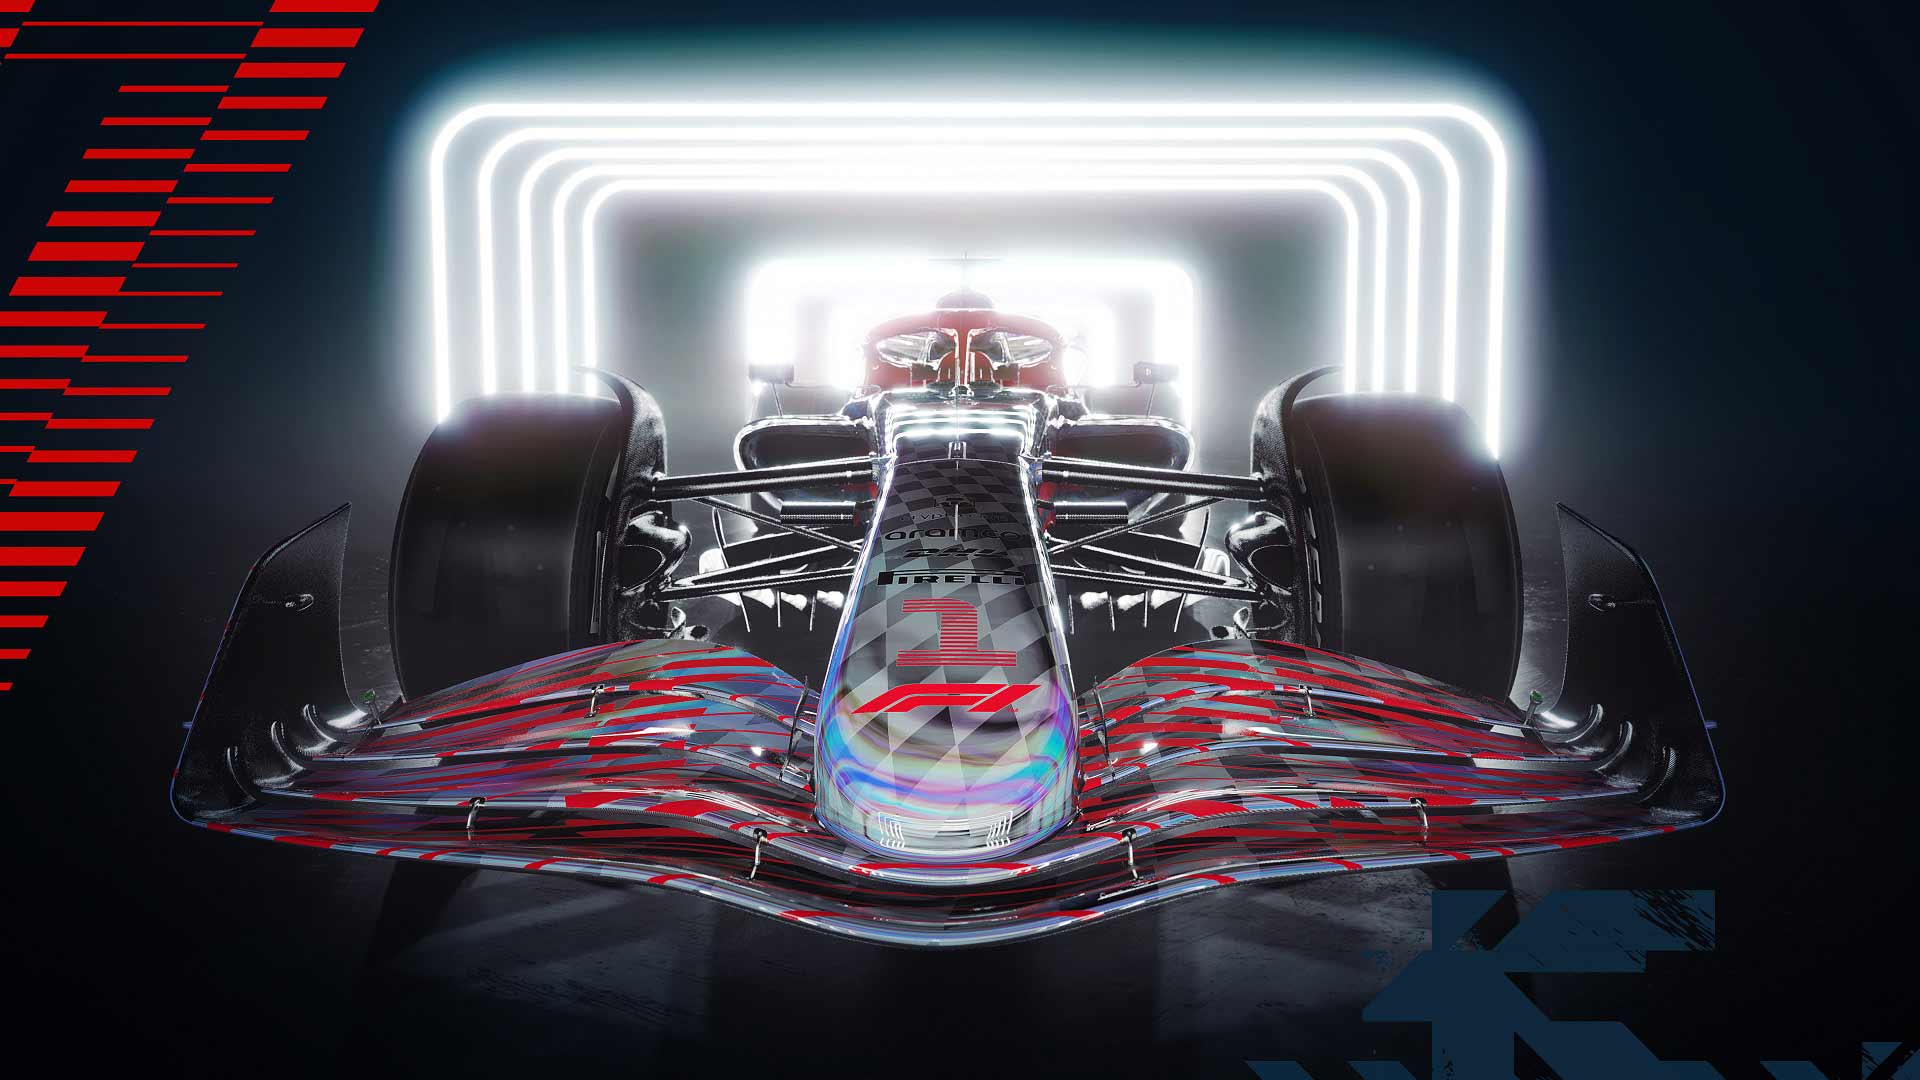 ‘F1 22’ is Getting VR Support on PC, Releasing in July – Road to VR